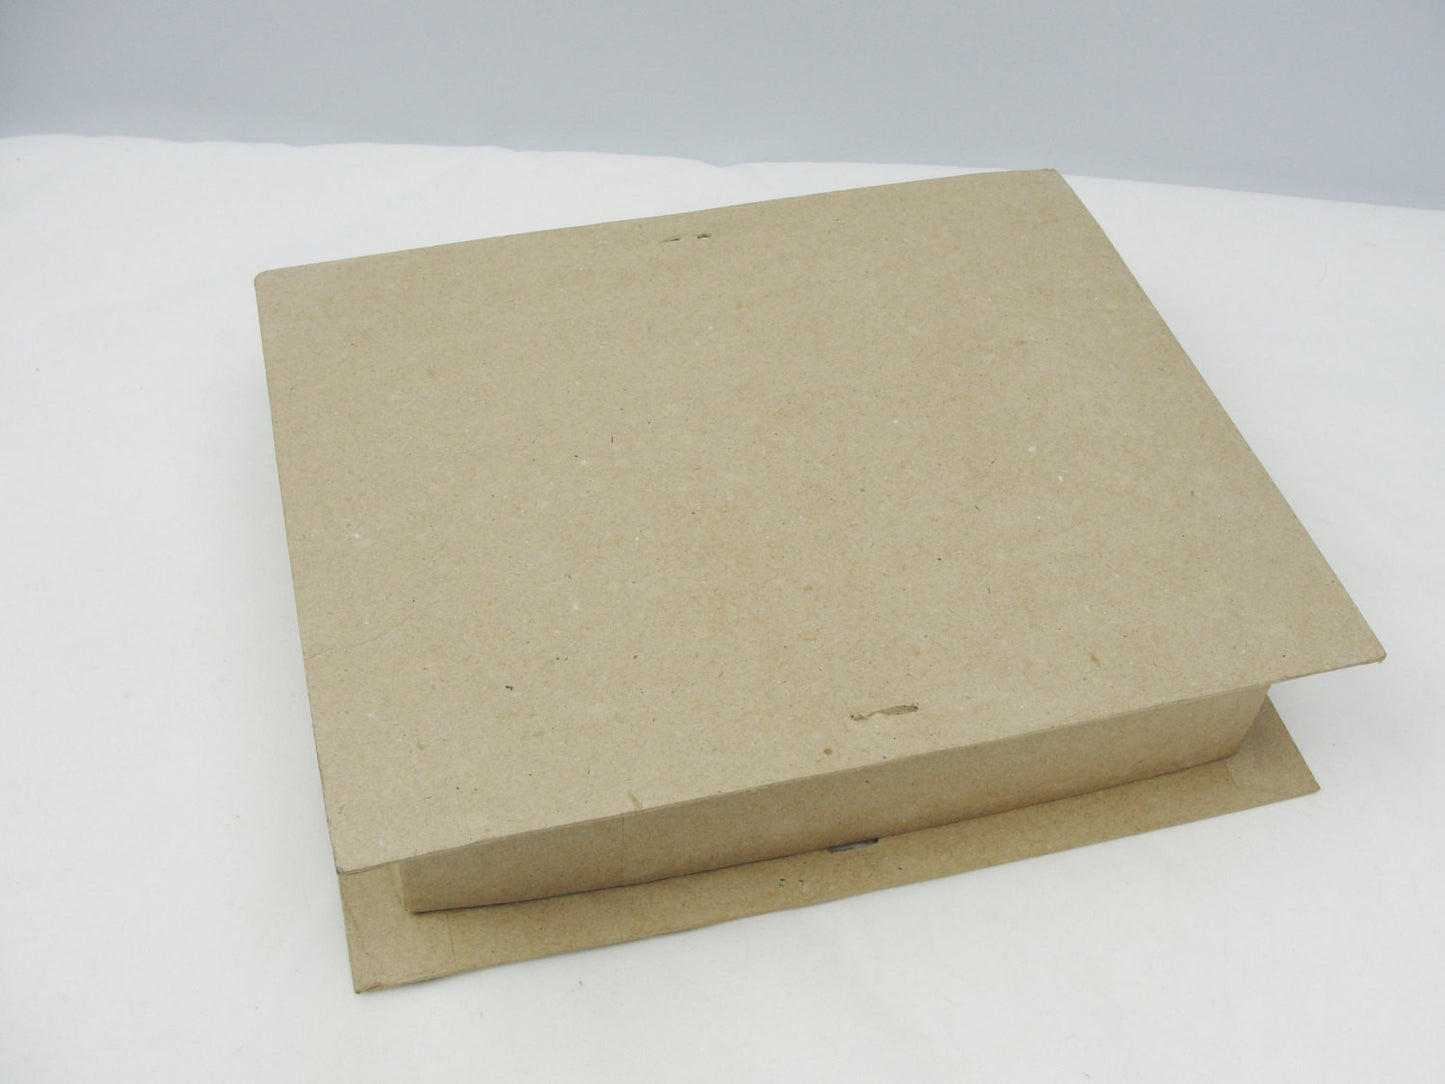 Large rectangle paper mache gift or keepsake box - Paper Mache - Craft Supply House